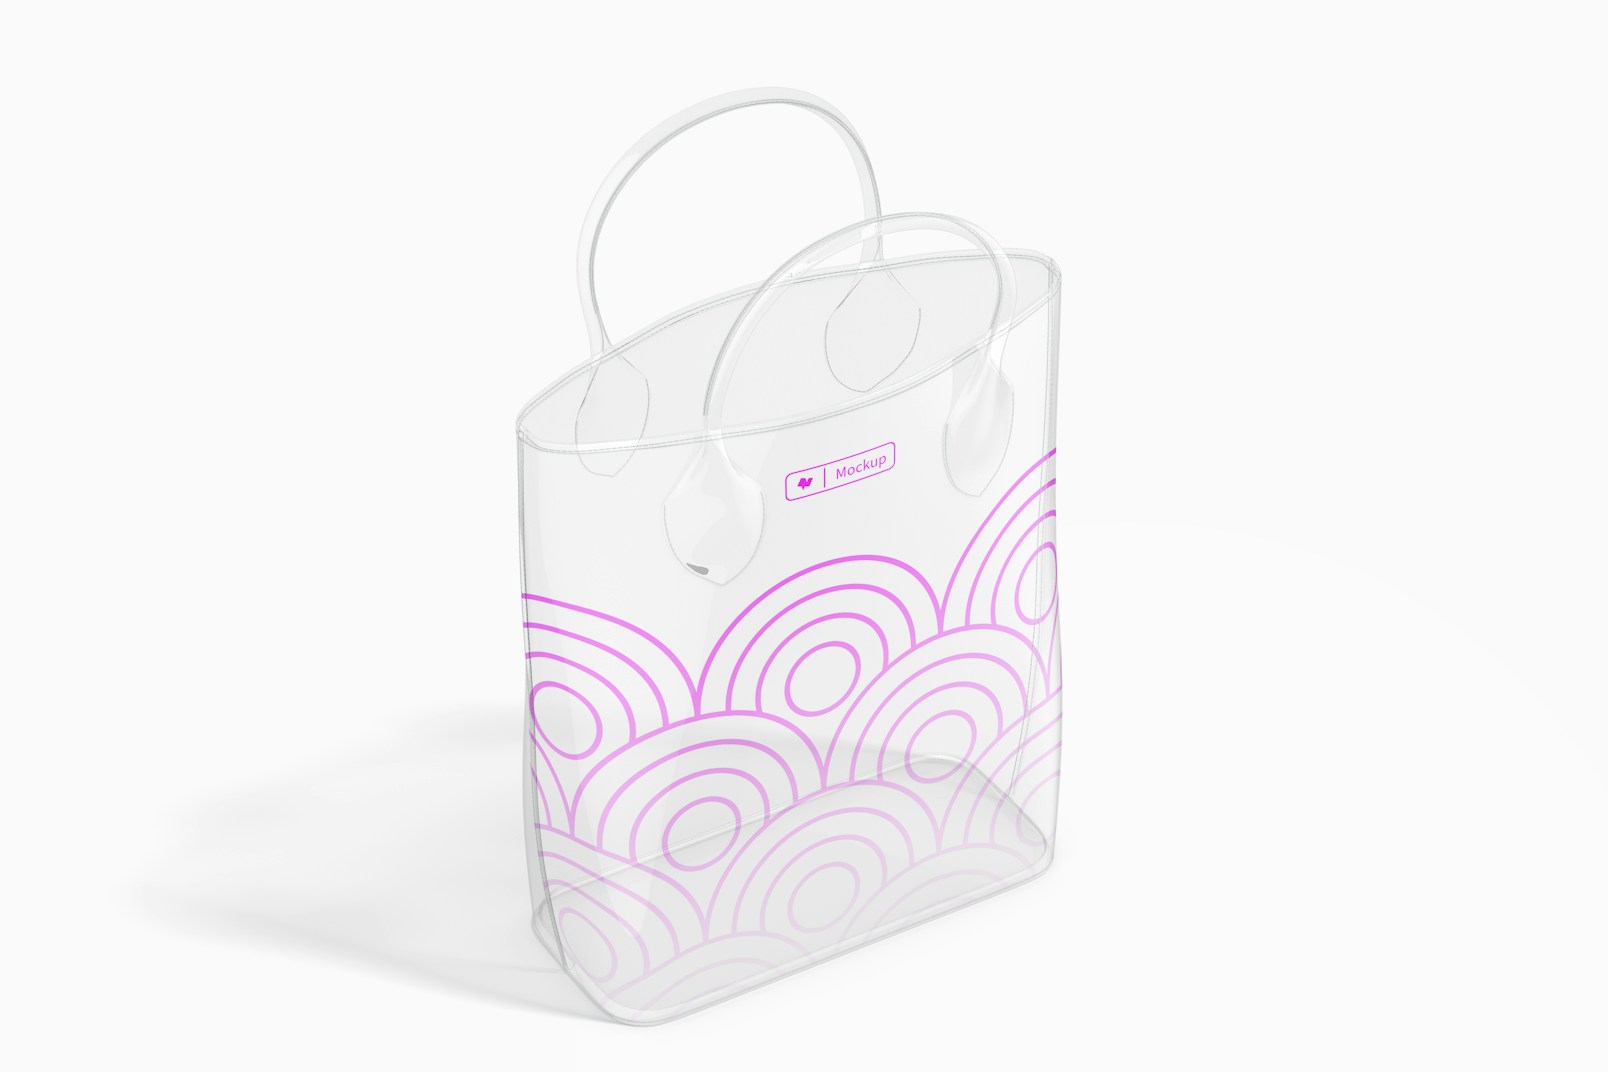 Clear Bag Mockup, Left View